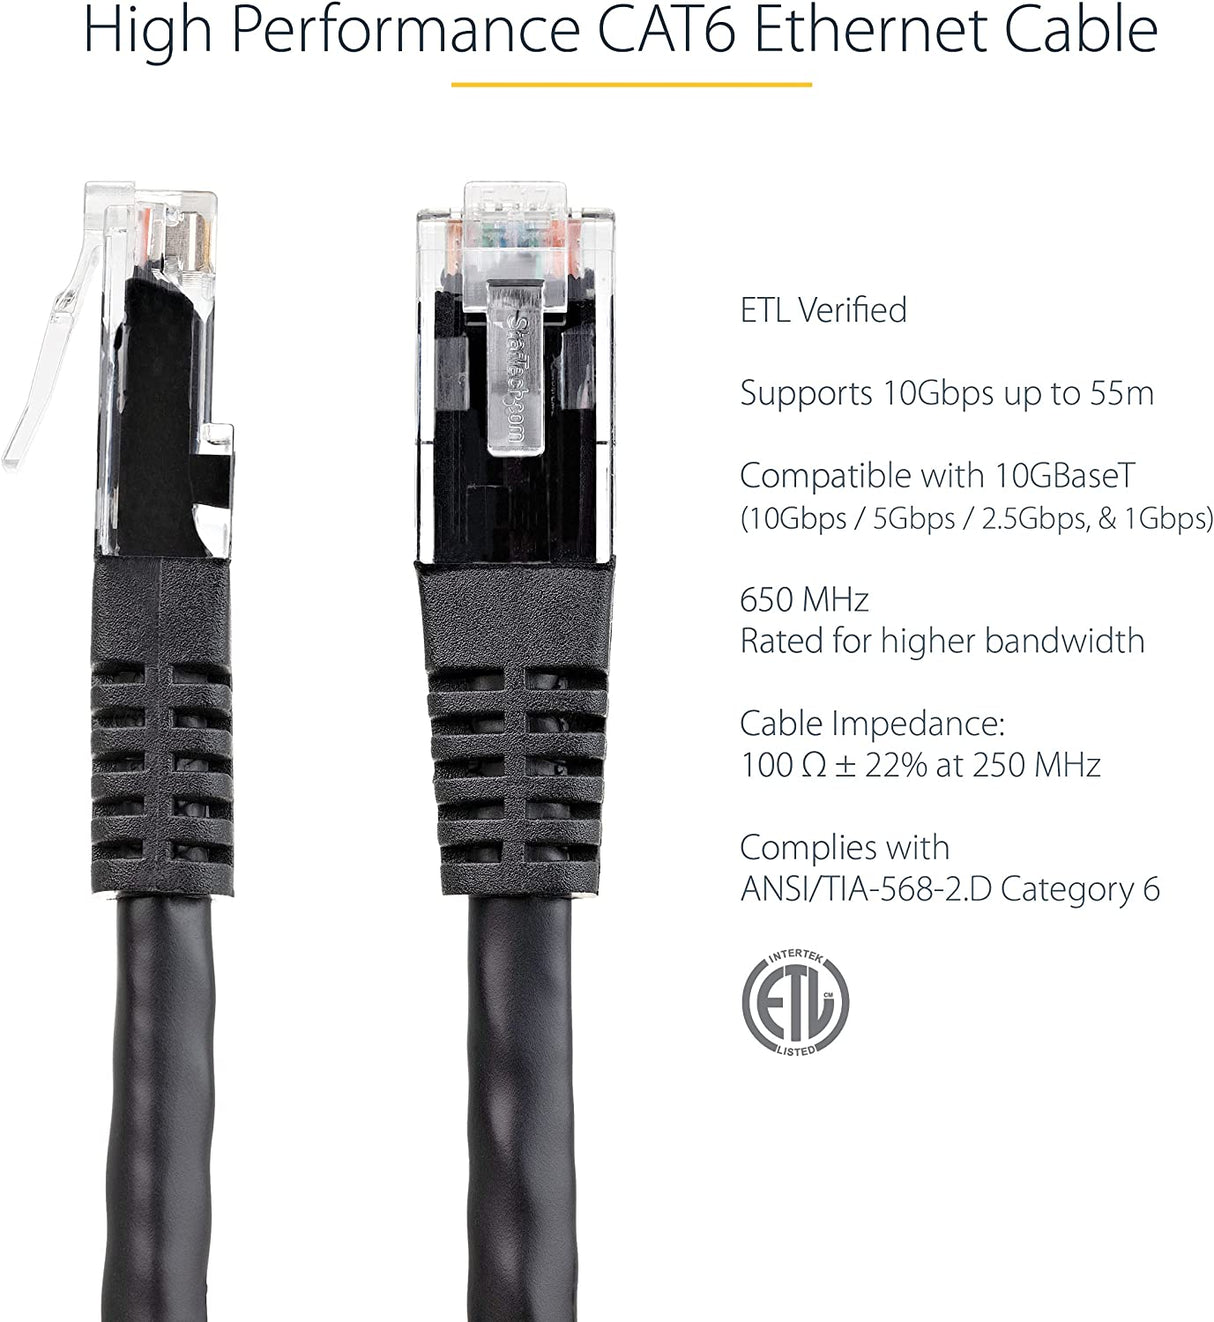 StarTech.com 10ft CAT6 Ethernet Cable - Black CAT 6 Gigabit Ethernet Wire -650MHz 100W PoE++ RJ45 UTP Molded Category 6 Network/Patch Cord w/Strain Relief/Fluke Tested UL/TIA Certified (C6PATCH10BK) Black 10 ft / 3m 1 Pack